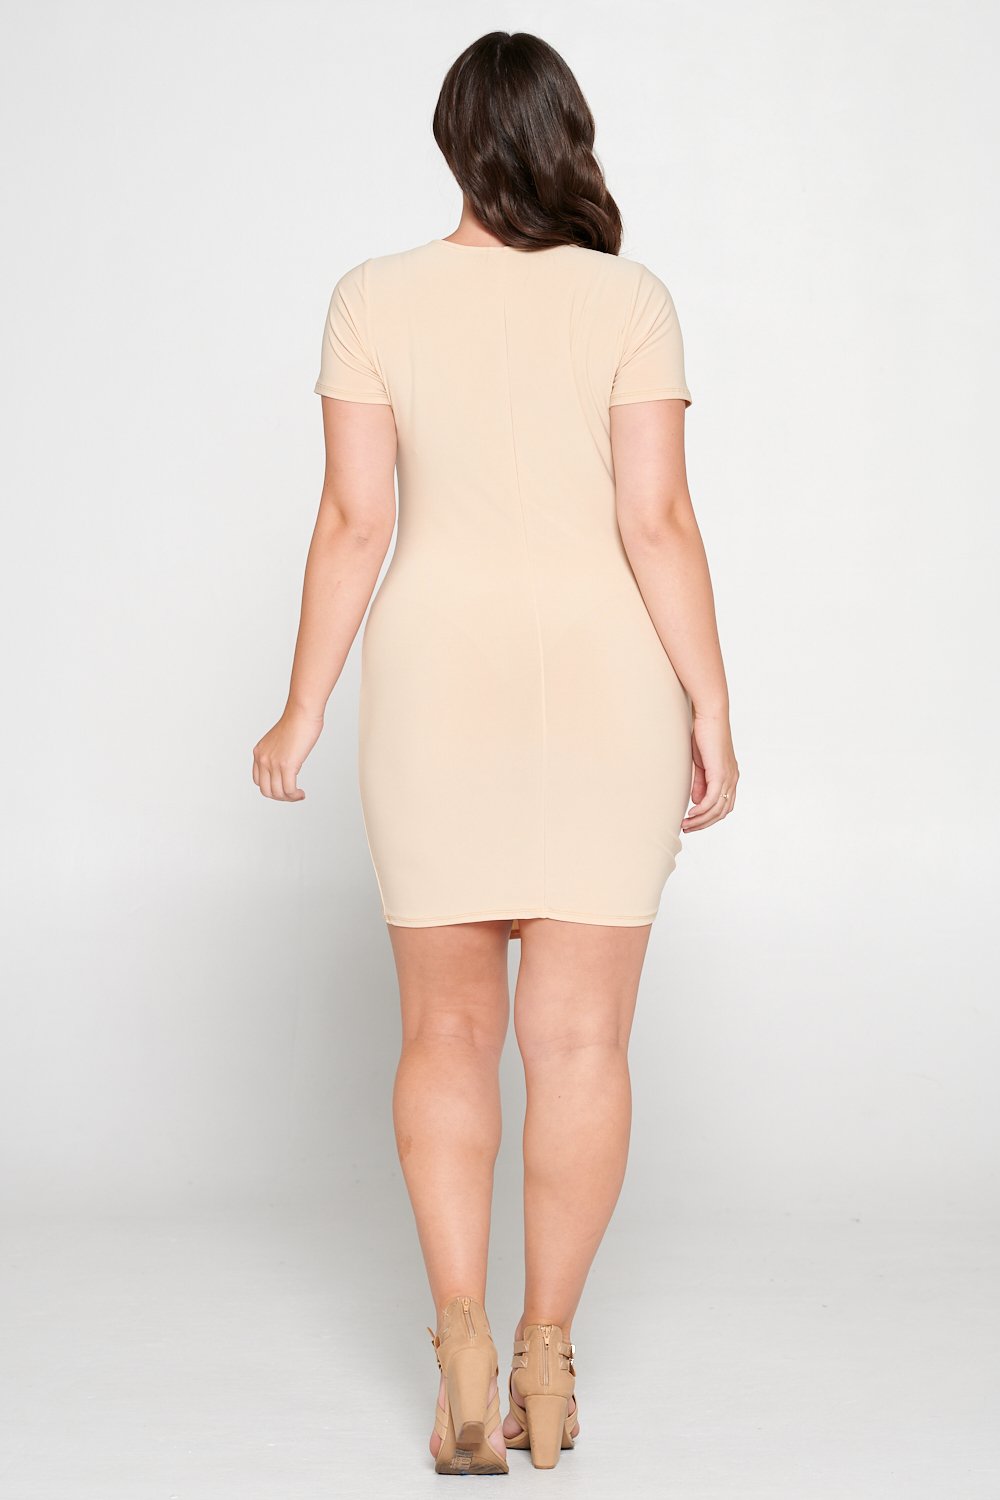 livd L I V D women's trendy contemporary plus size  ruched mini party dress with draping details ity slingky dress in taupe stone beige